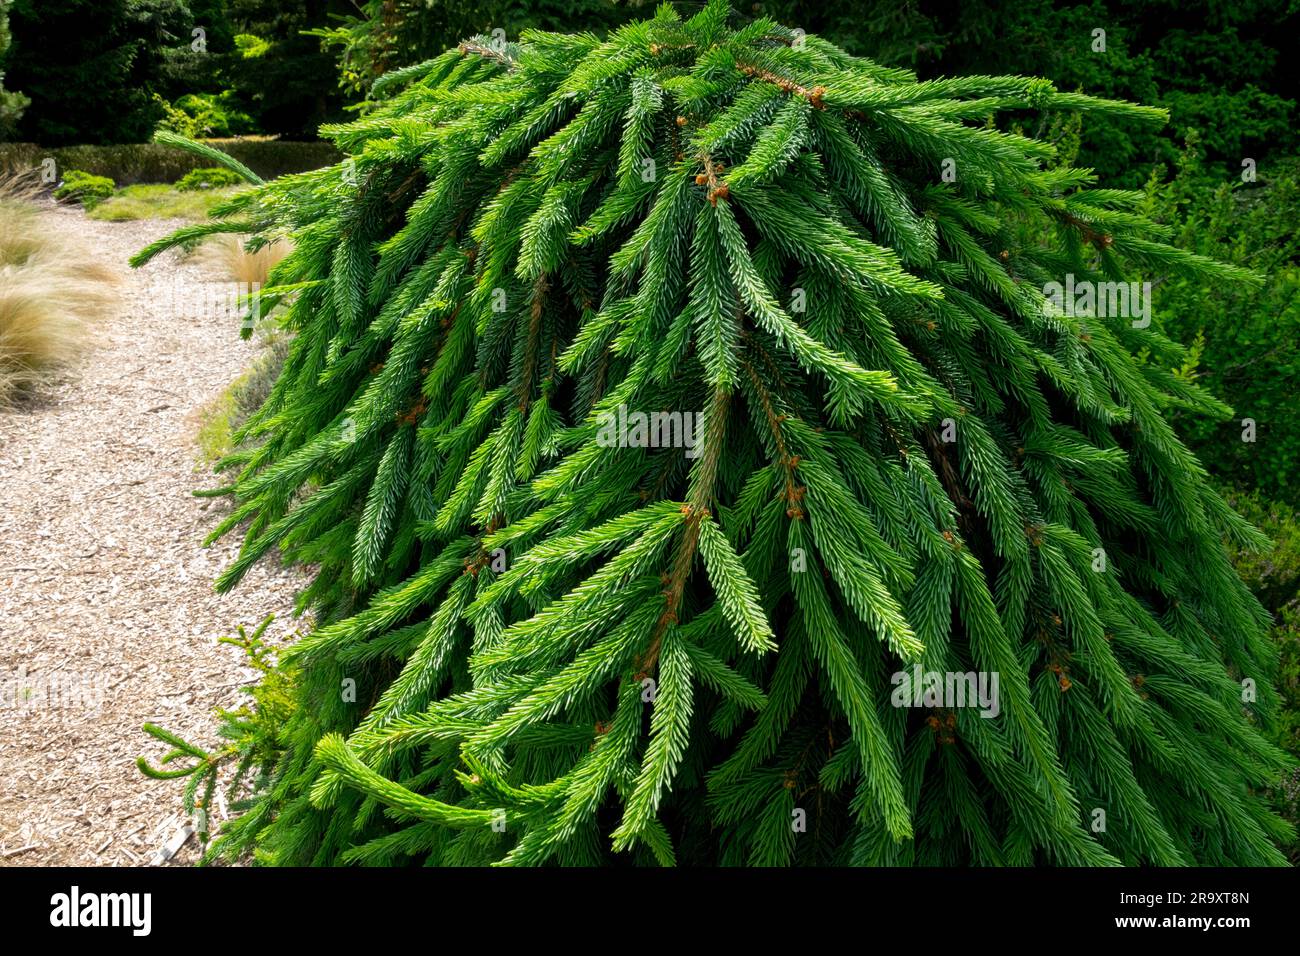 Weeping, Branches, Densely, Low, Garden, Conifer, Spruce, Tree, Norway spruce, Picea abies 'Frohburg' Spruce garden Stock Photo